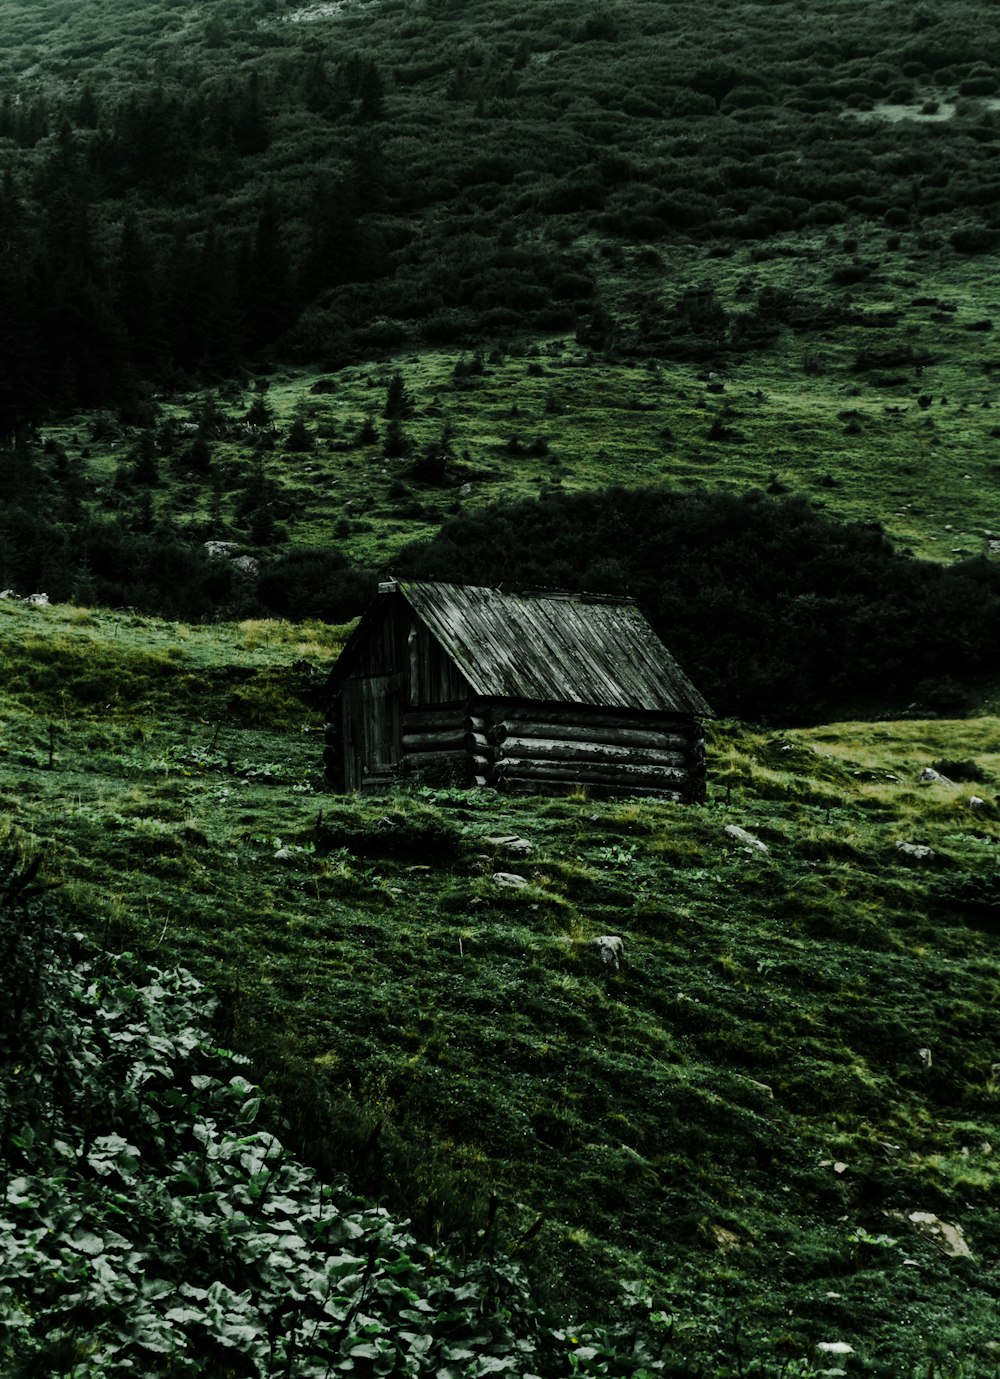 a small cabin in the middle of a grassy field